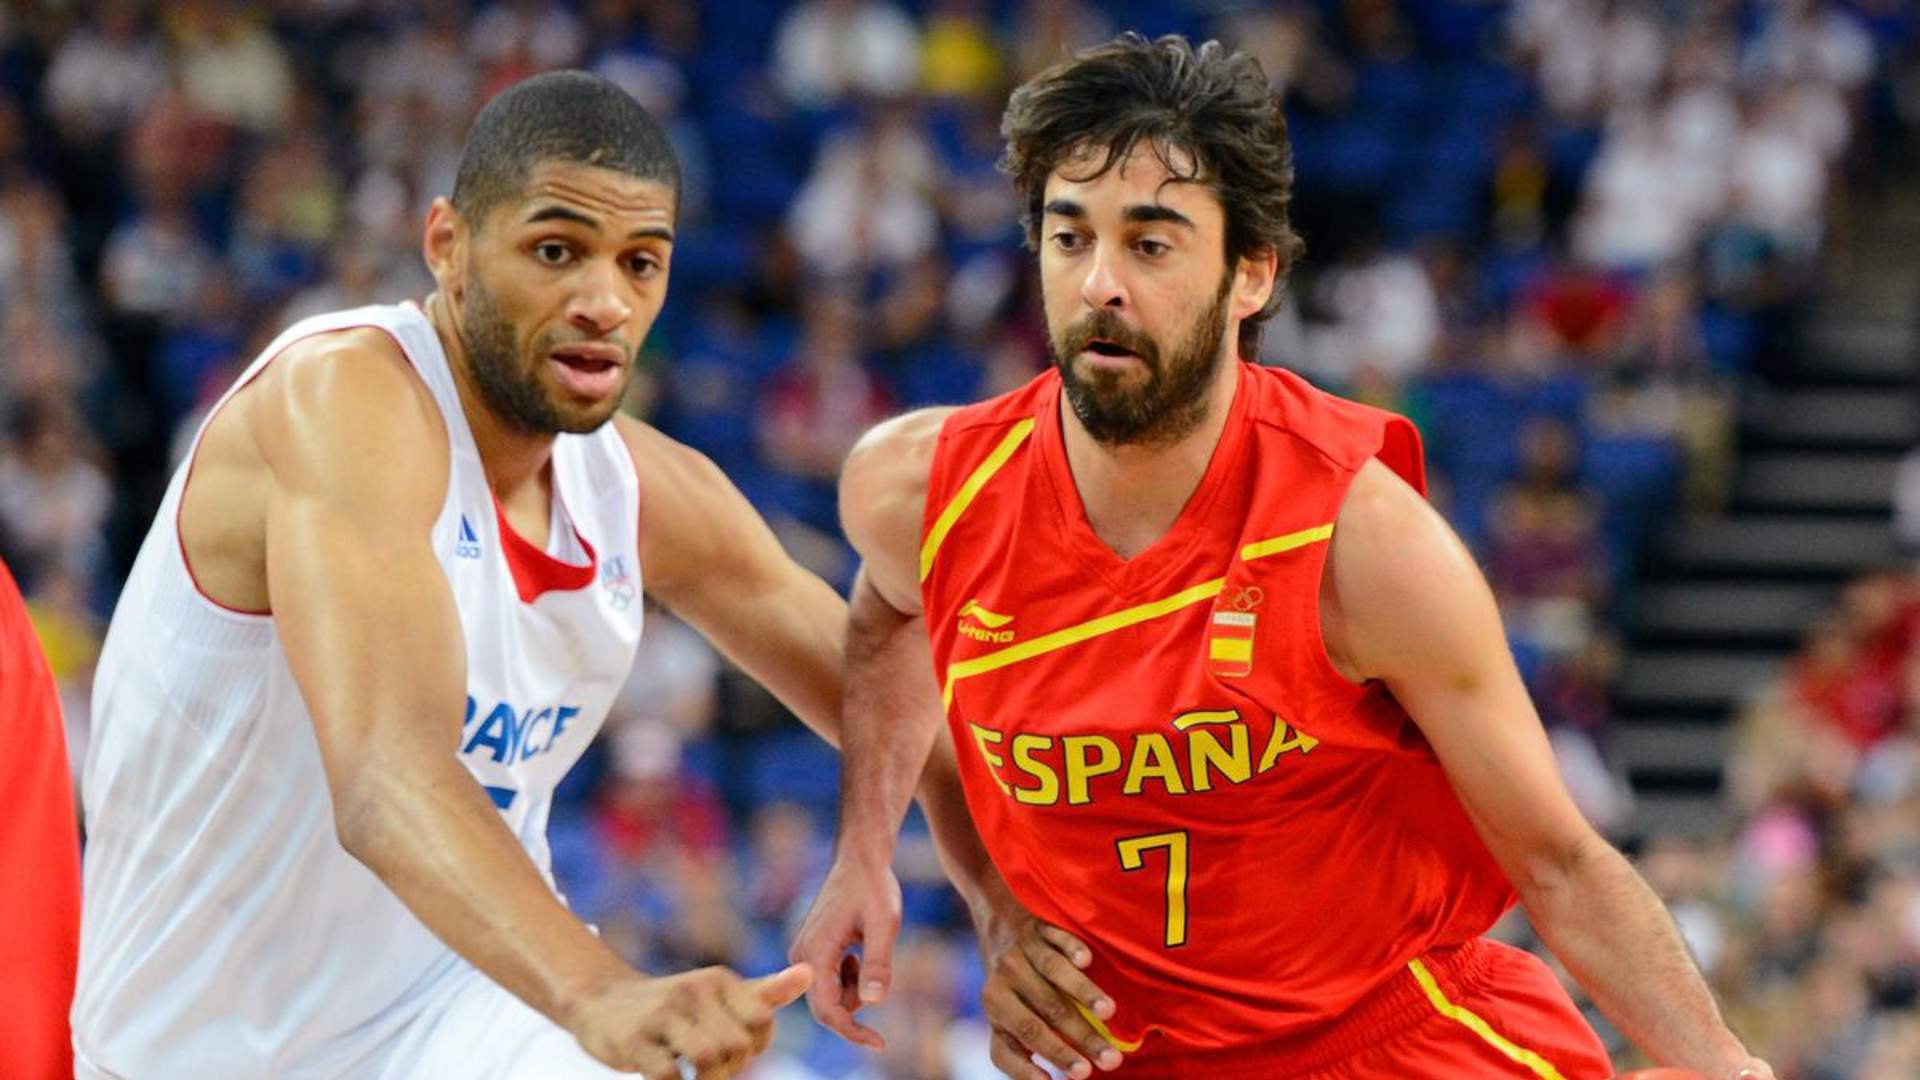 The EuroBasket 2022 Round of 16 match between Spain vs Lithuania will be held at Arena Berlin on September 10 at 8:45 PM (International time), and September 11, 12:15 AM (Indian time).